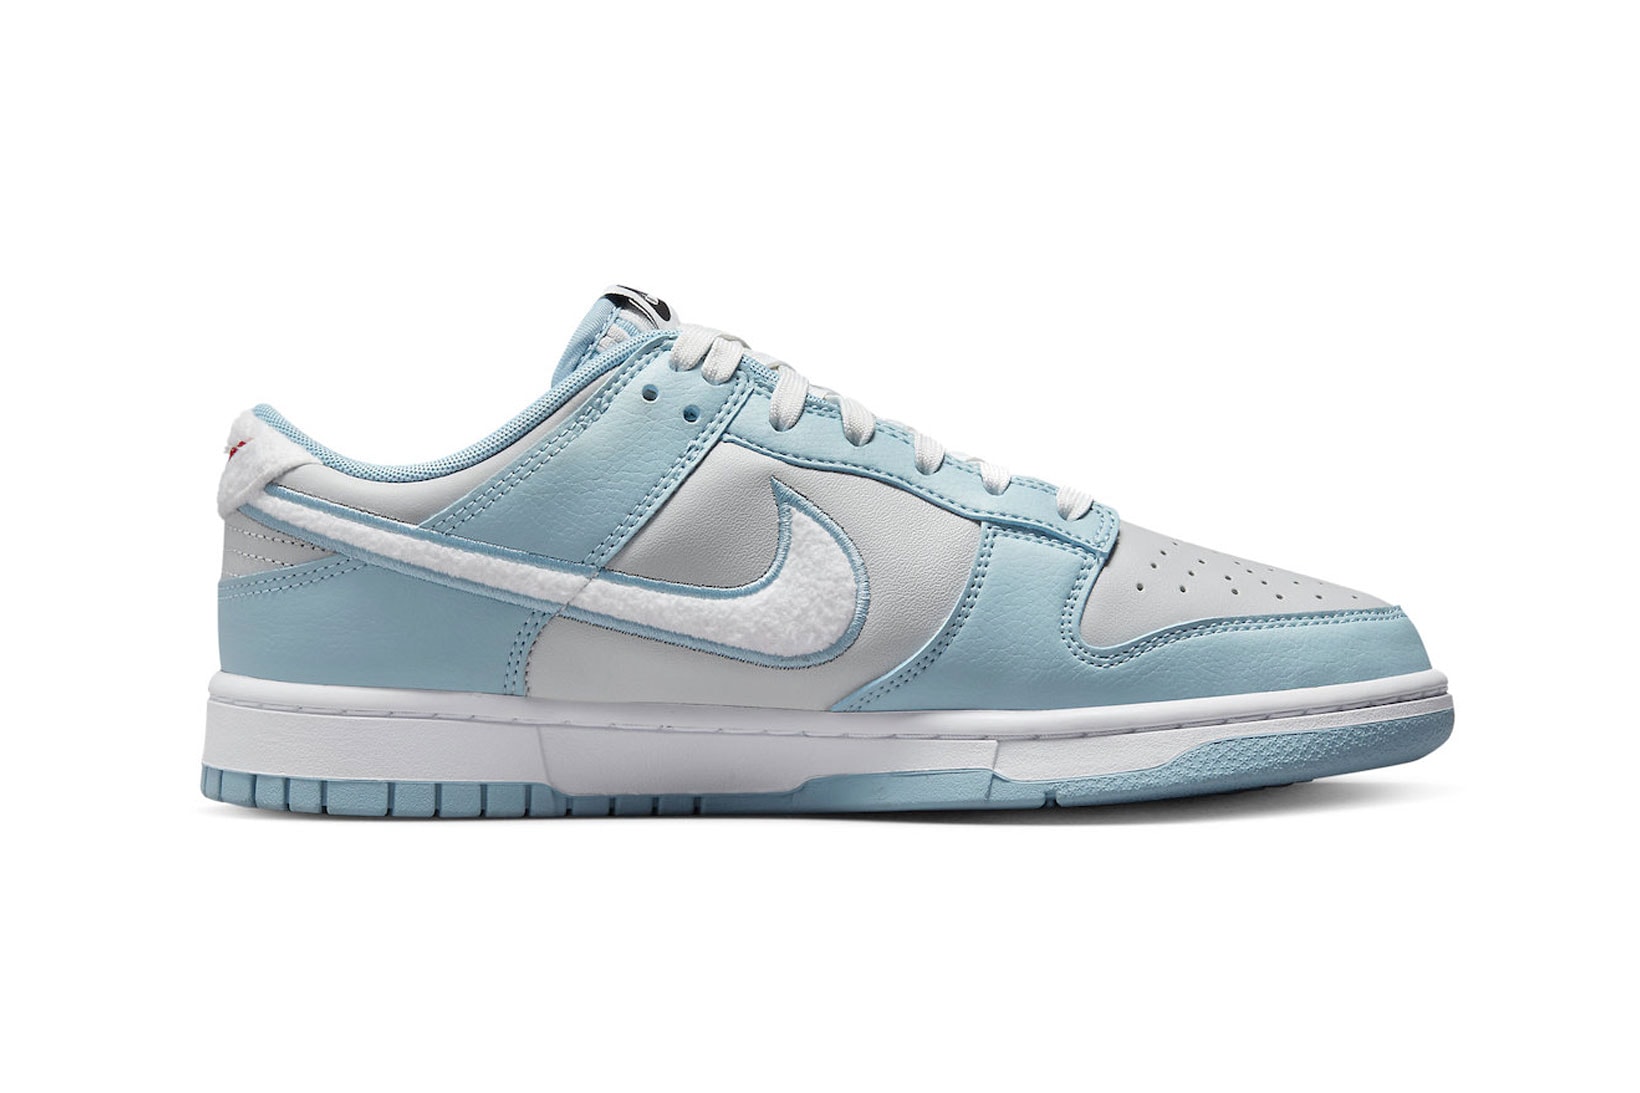 Nike Dunk Low Worn Blue Fleece Swooshes Images Release Info